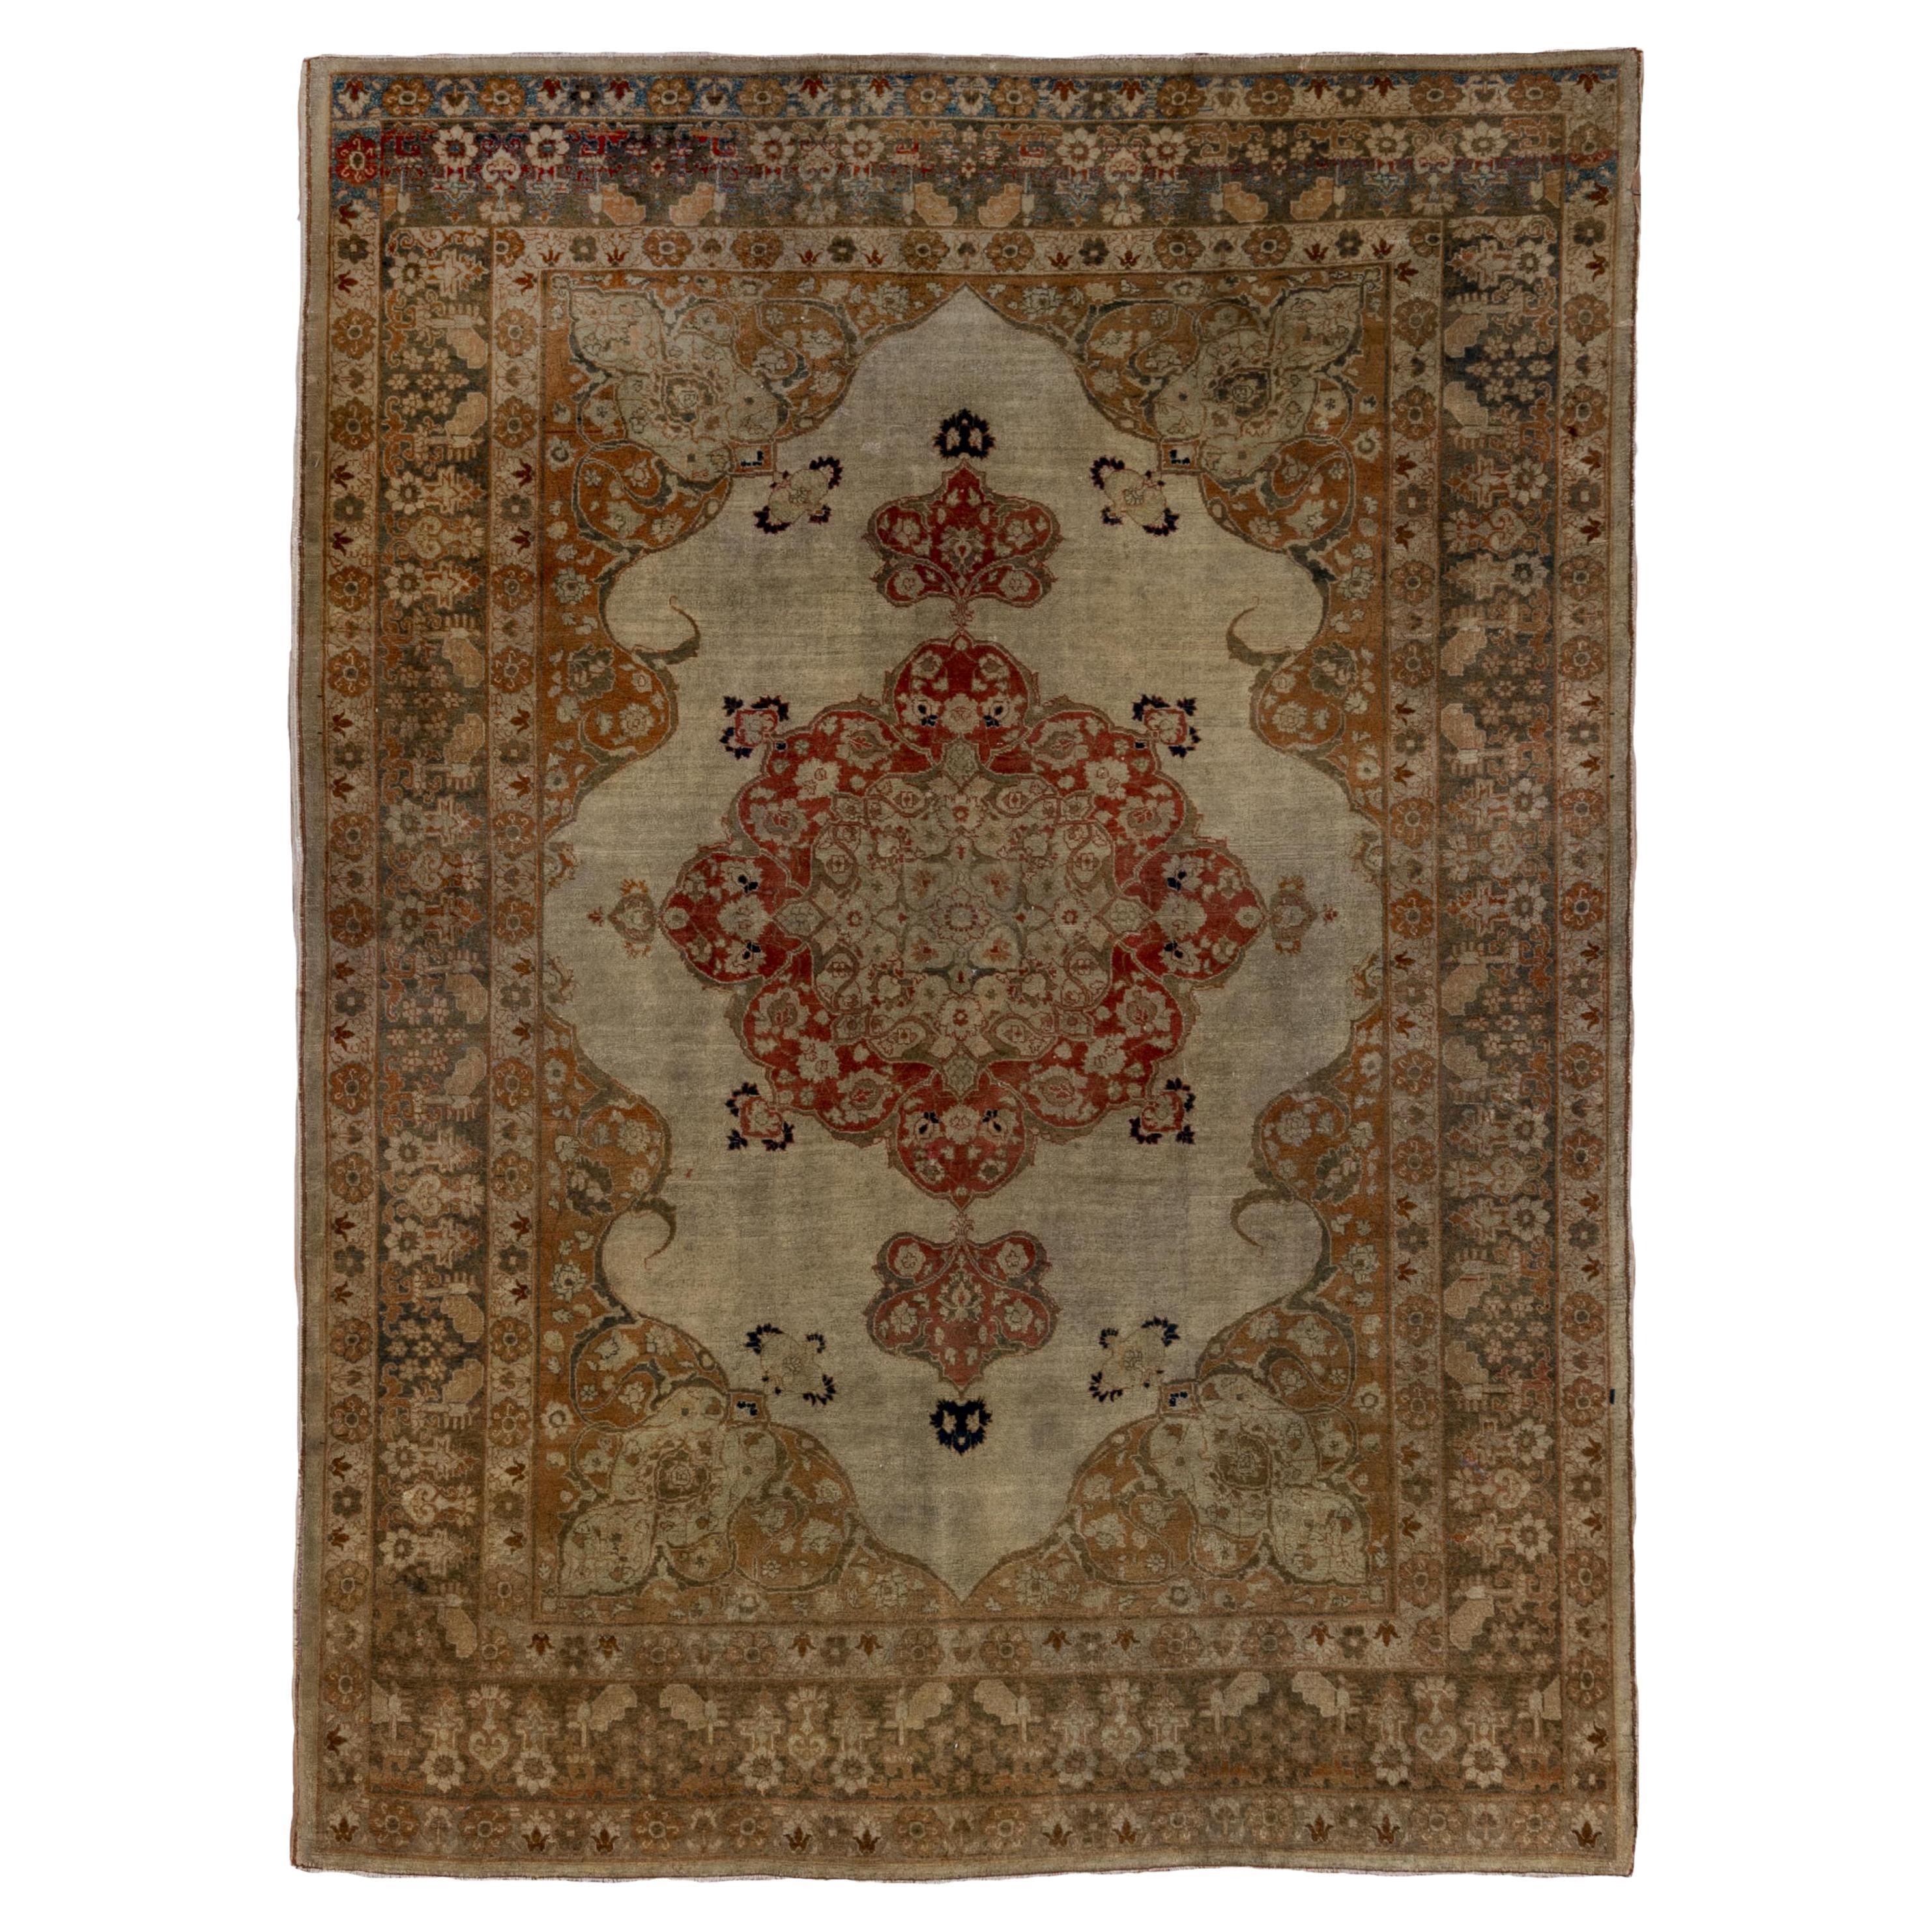 Ornate Central Medallion Tabriz Rug in Rusted Olive with Royal Red Accents For Sale